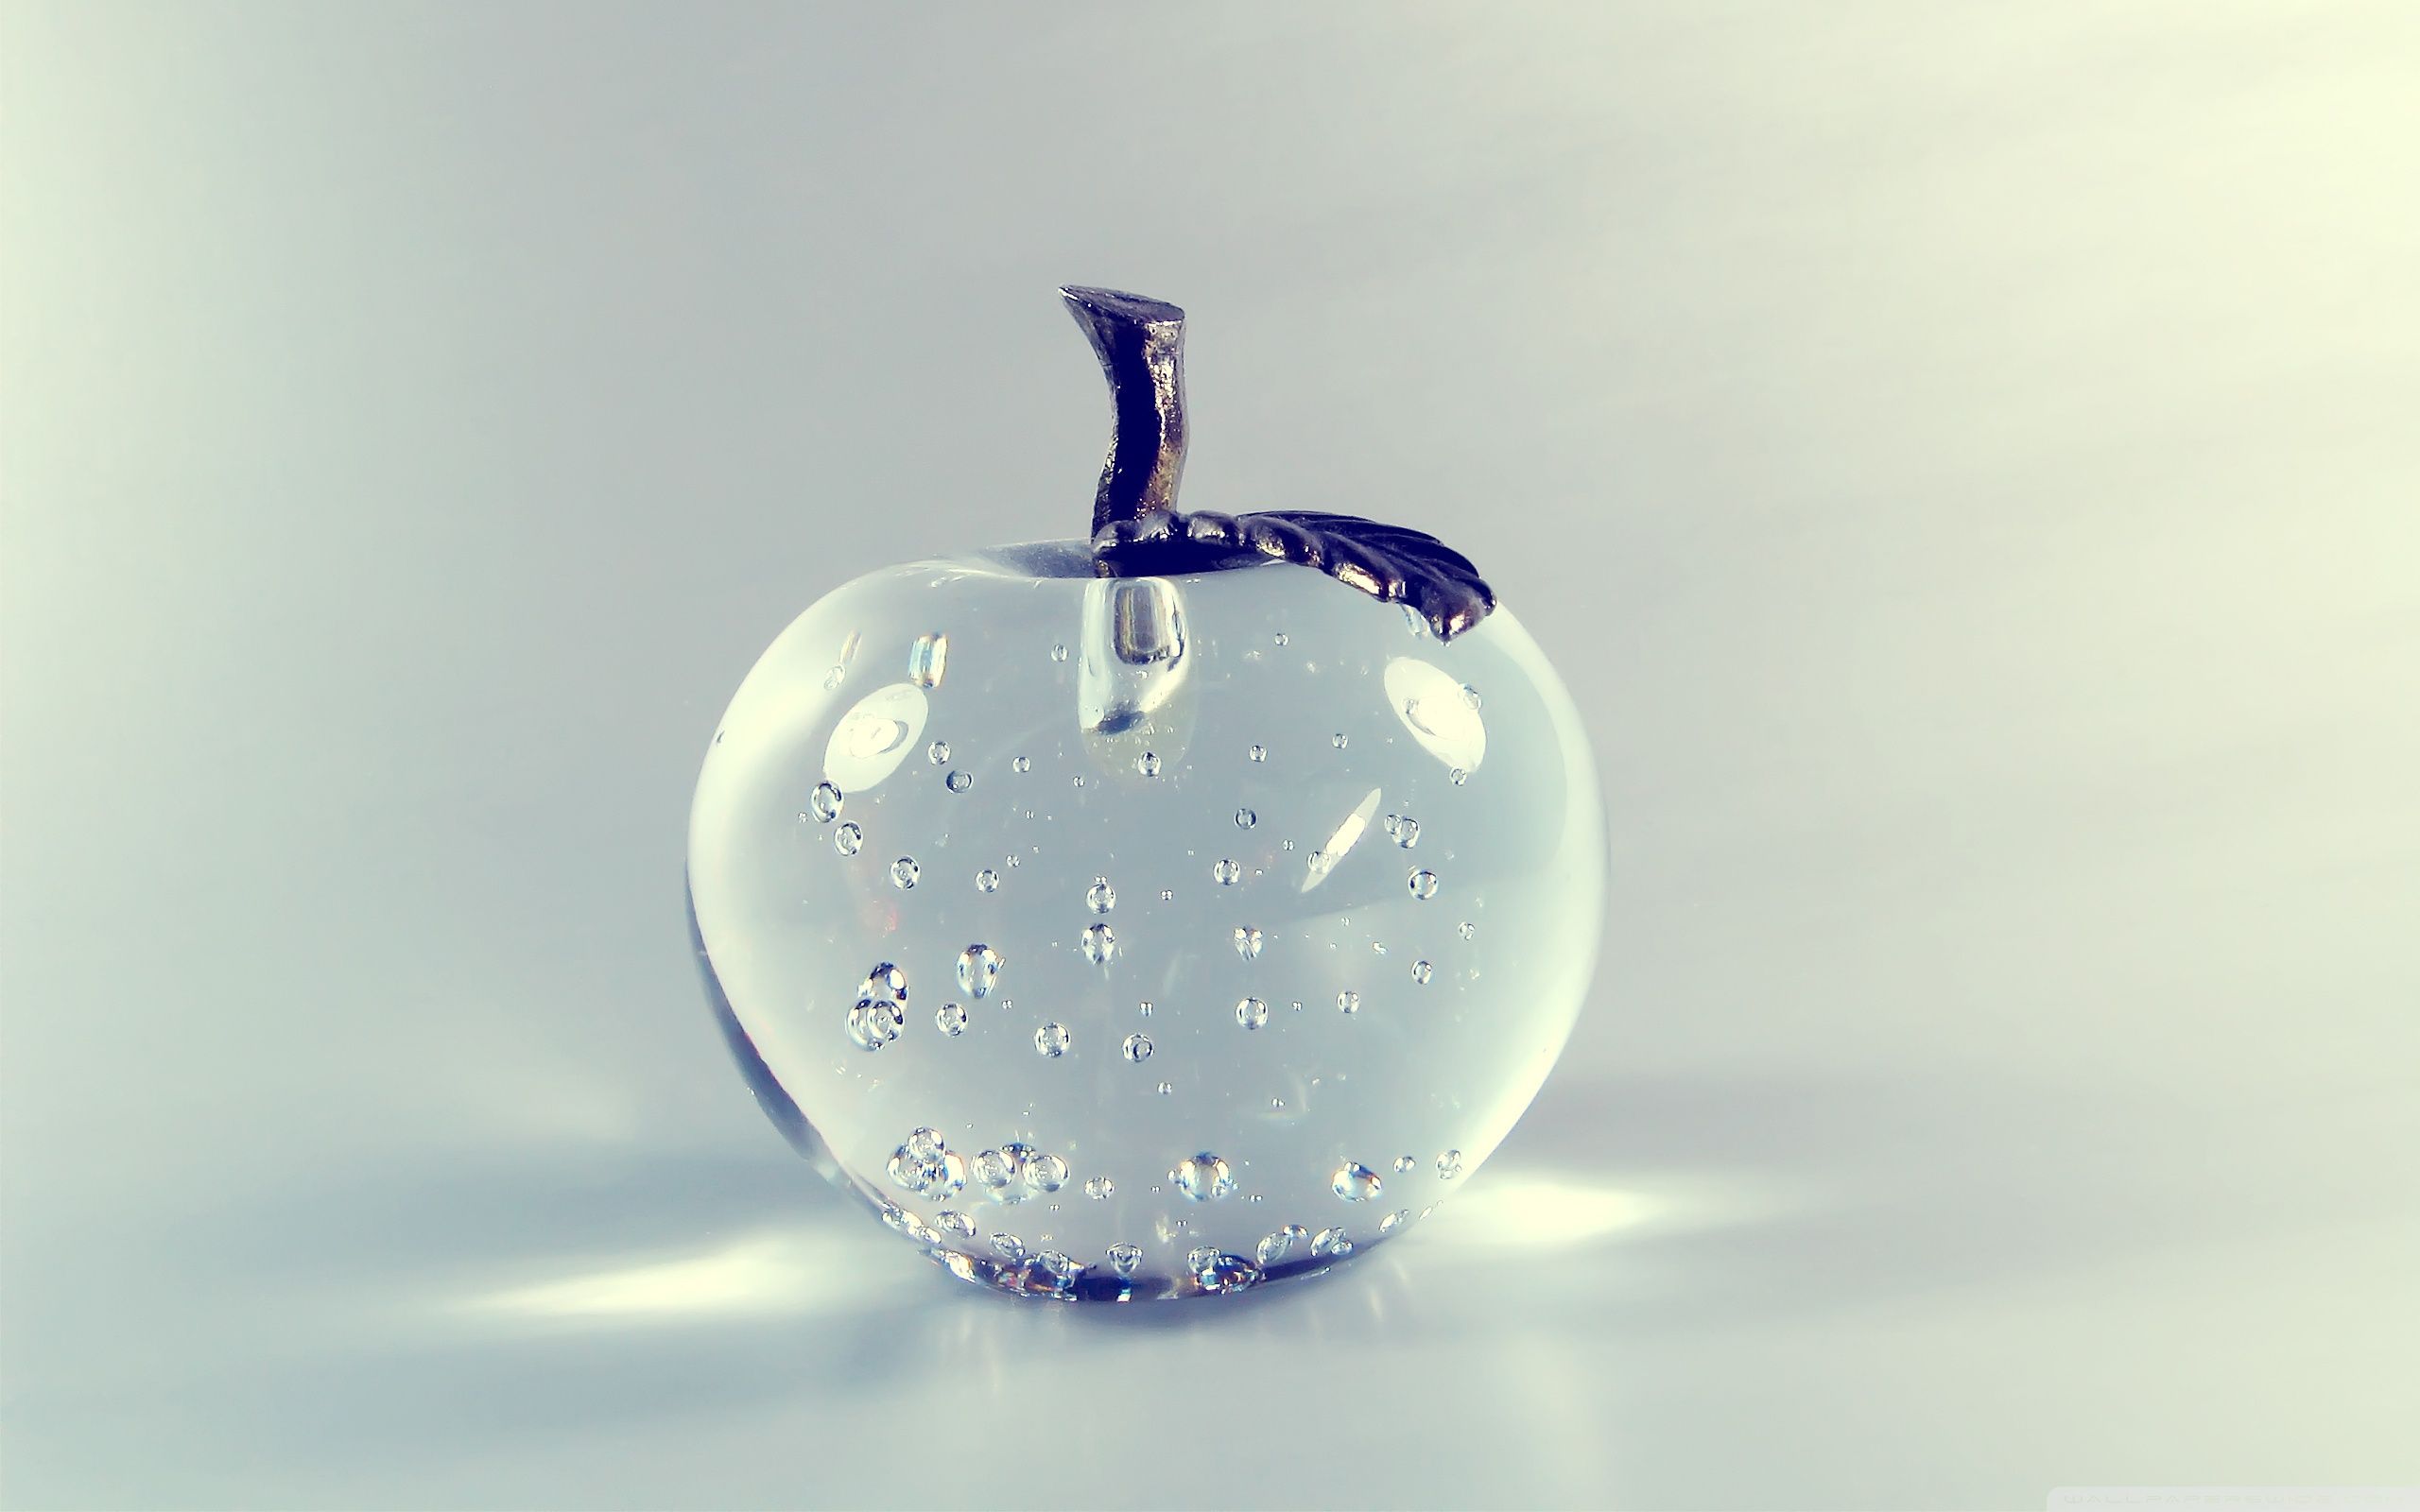 General 2560x1600 fruit glass water drops apples